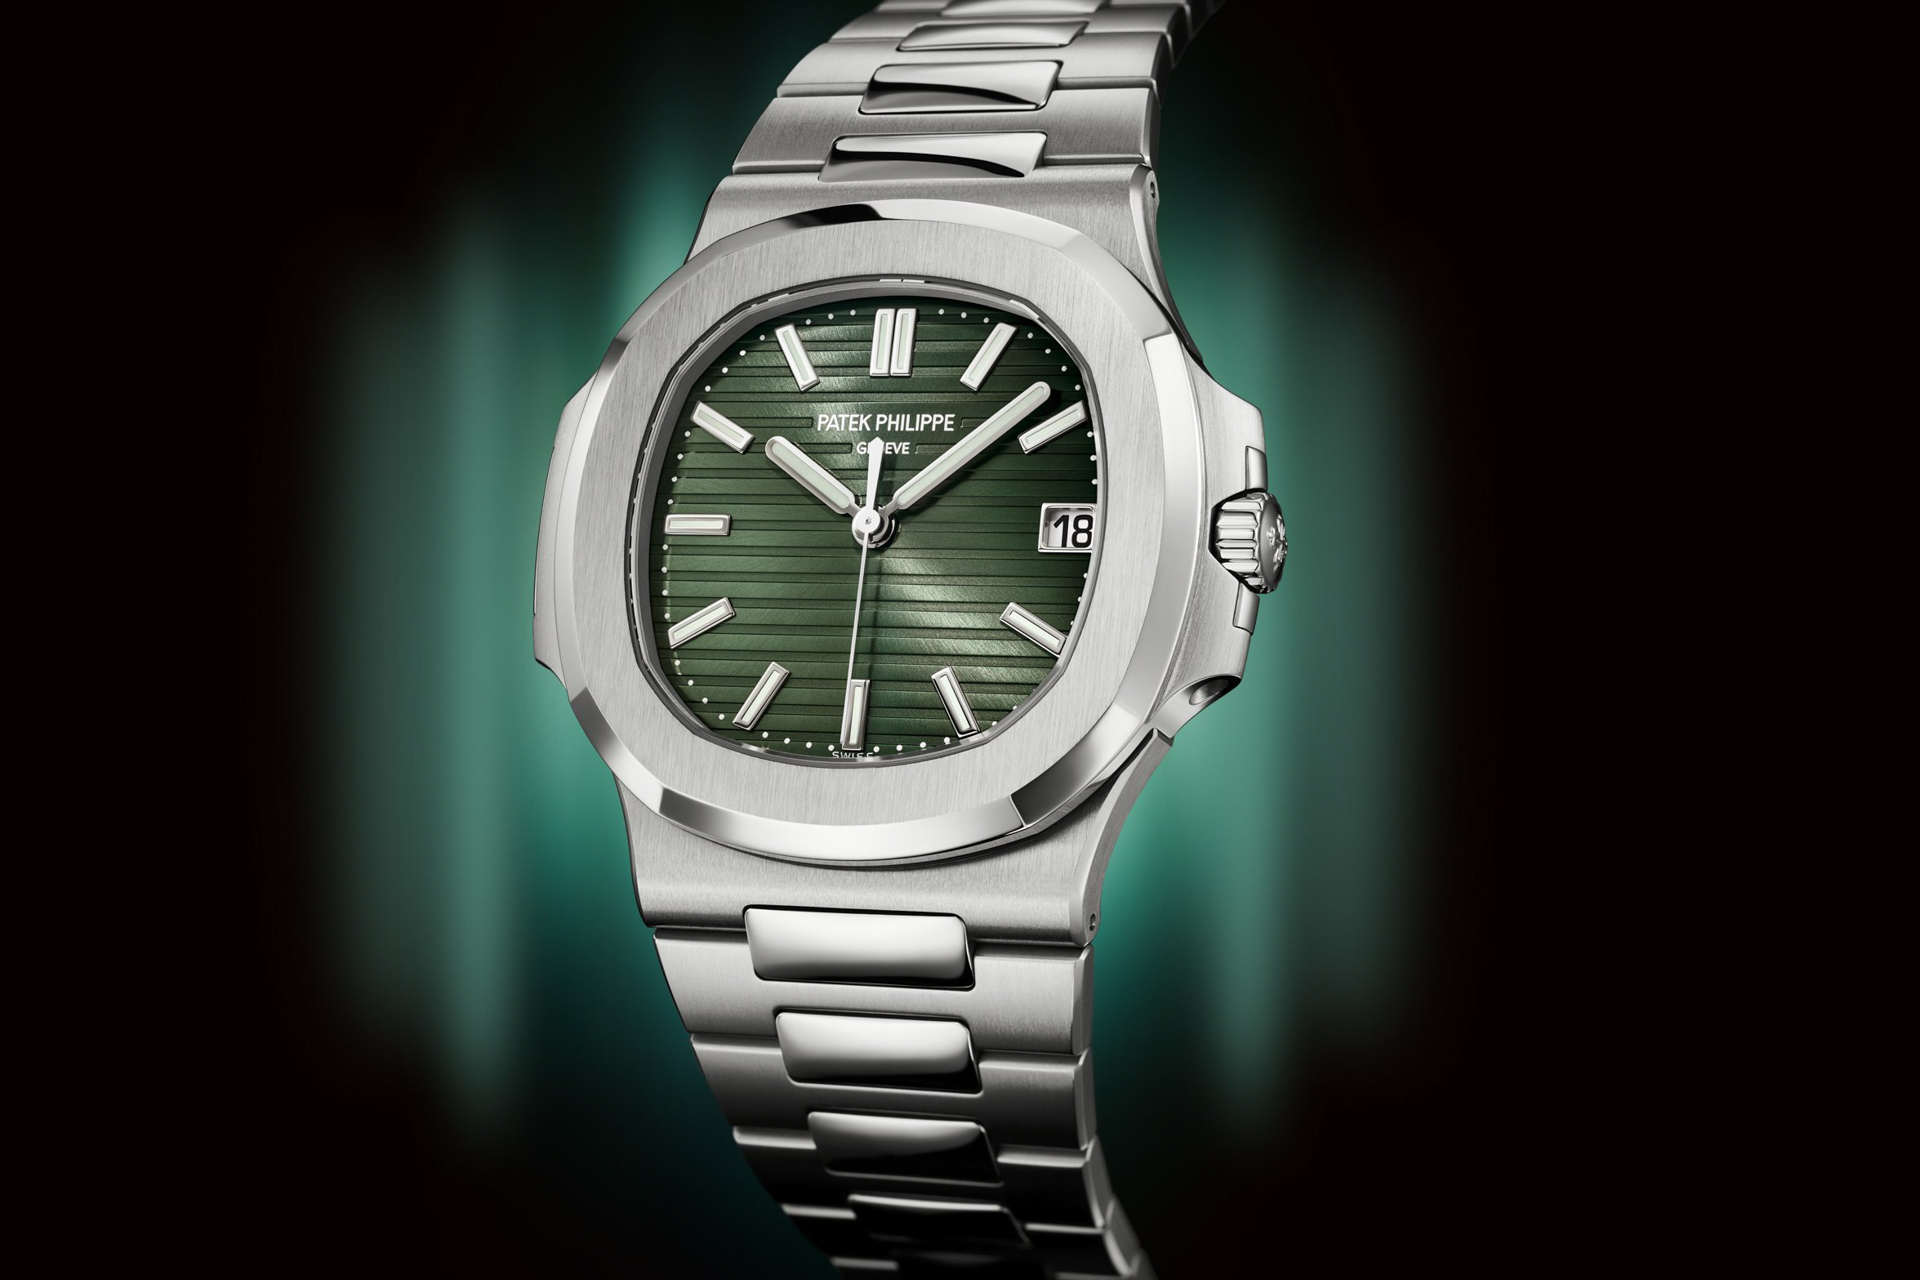 Patek Philippe's olive green Nautilus being flipped for $363,600, more than  ten times its retail price